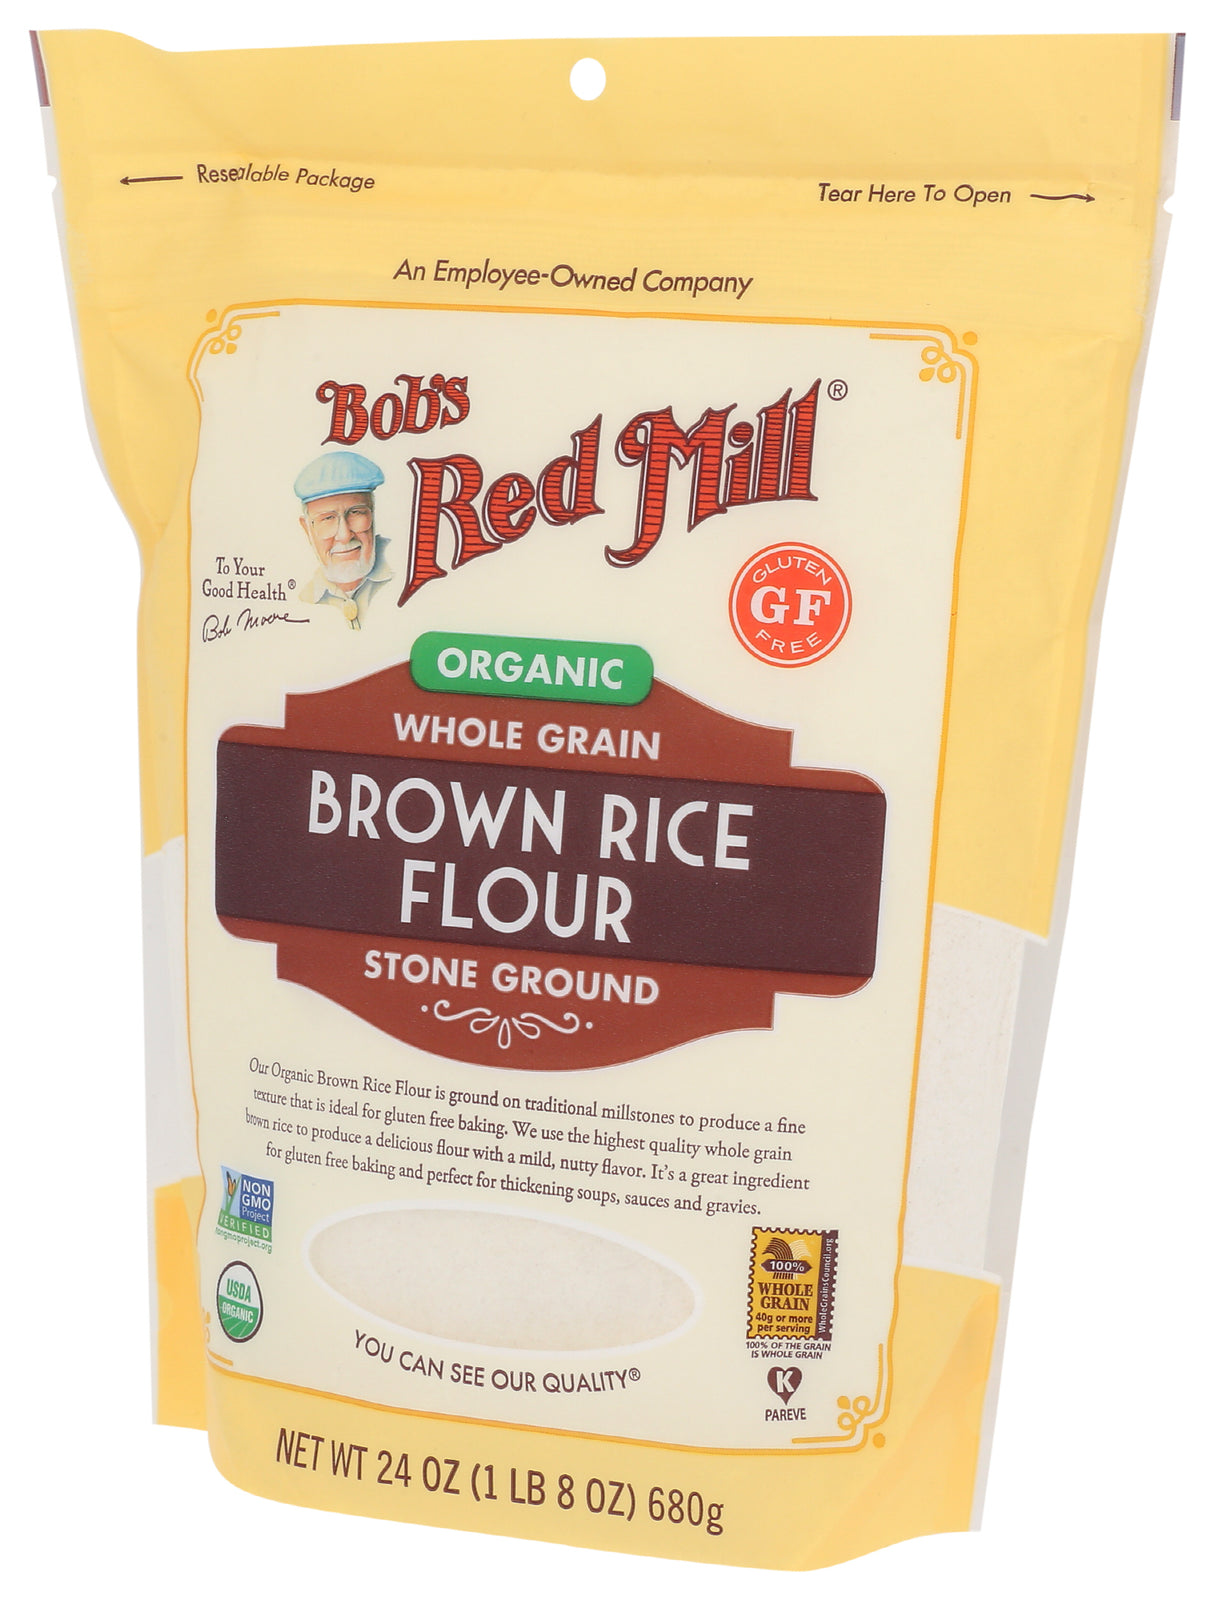 Bob's Red Mill Organic Whole Grain Stone Ground Brown Rice Flour, 24oz (Pack of 4)